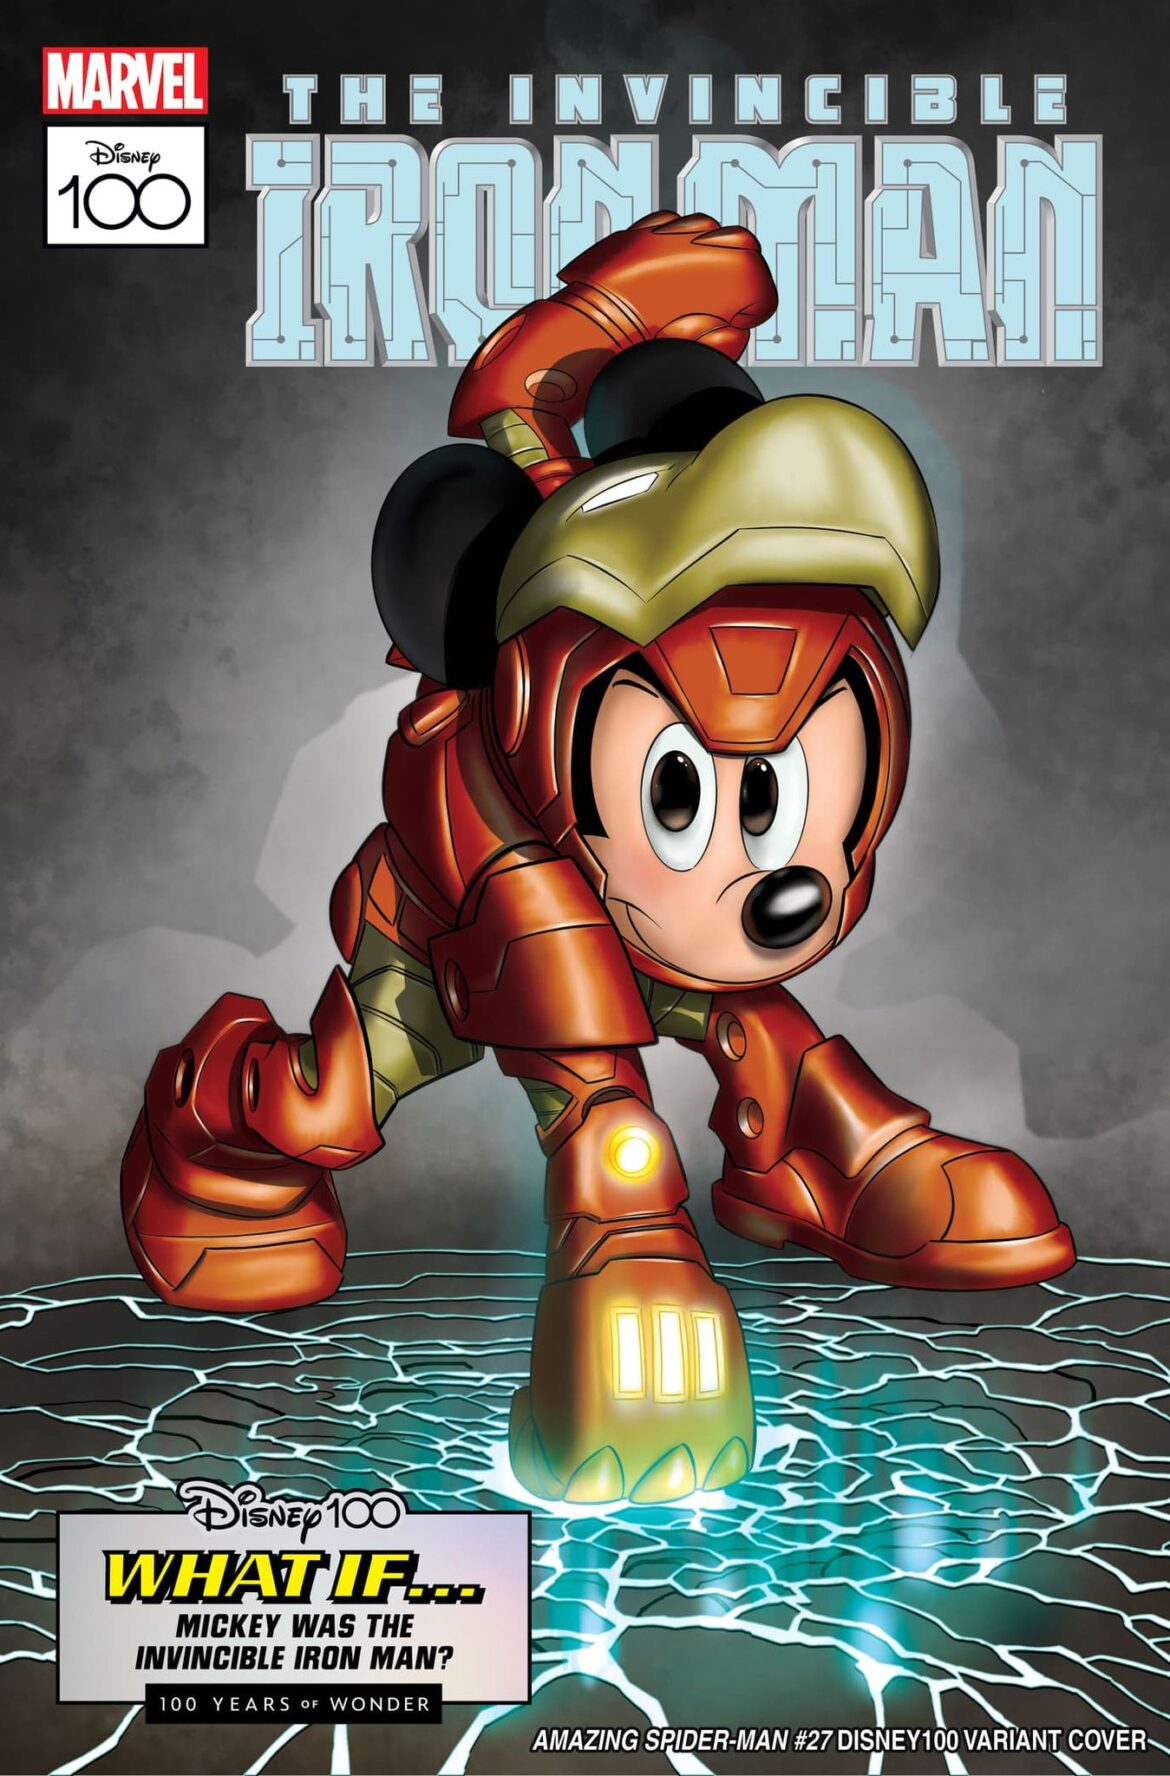 Marvel Comics Celebrates Disney100 with Variant Covers Highlighting Mickey Mouse and More